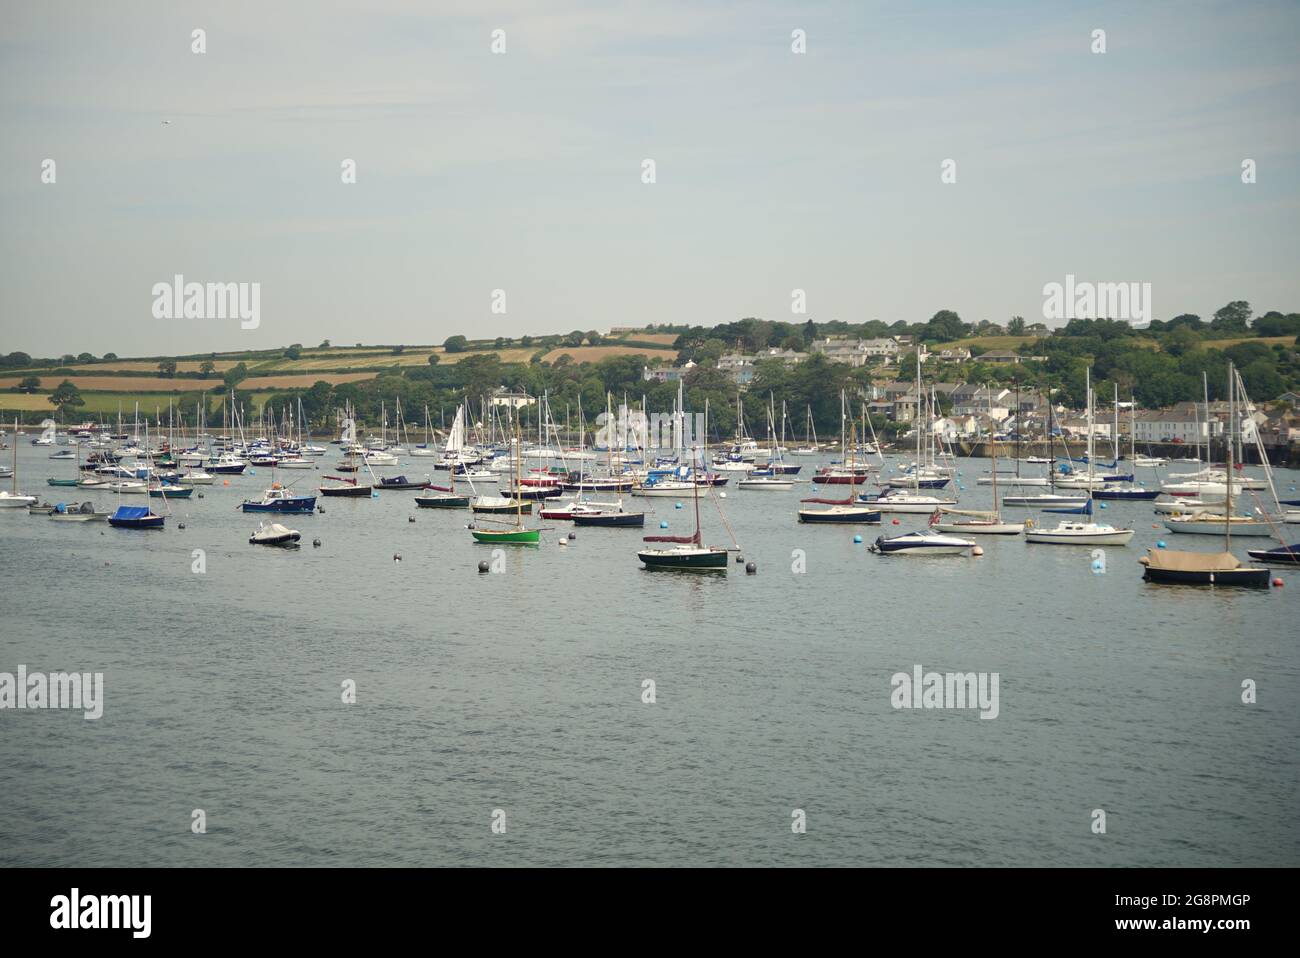 Boats moored in Falmout bay near harbour with land in background Stock Photo